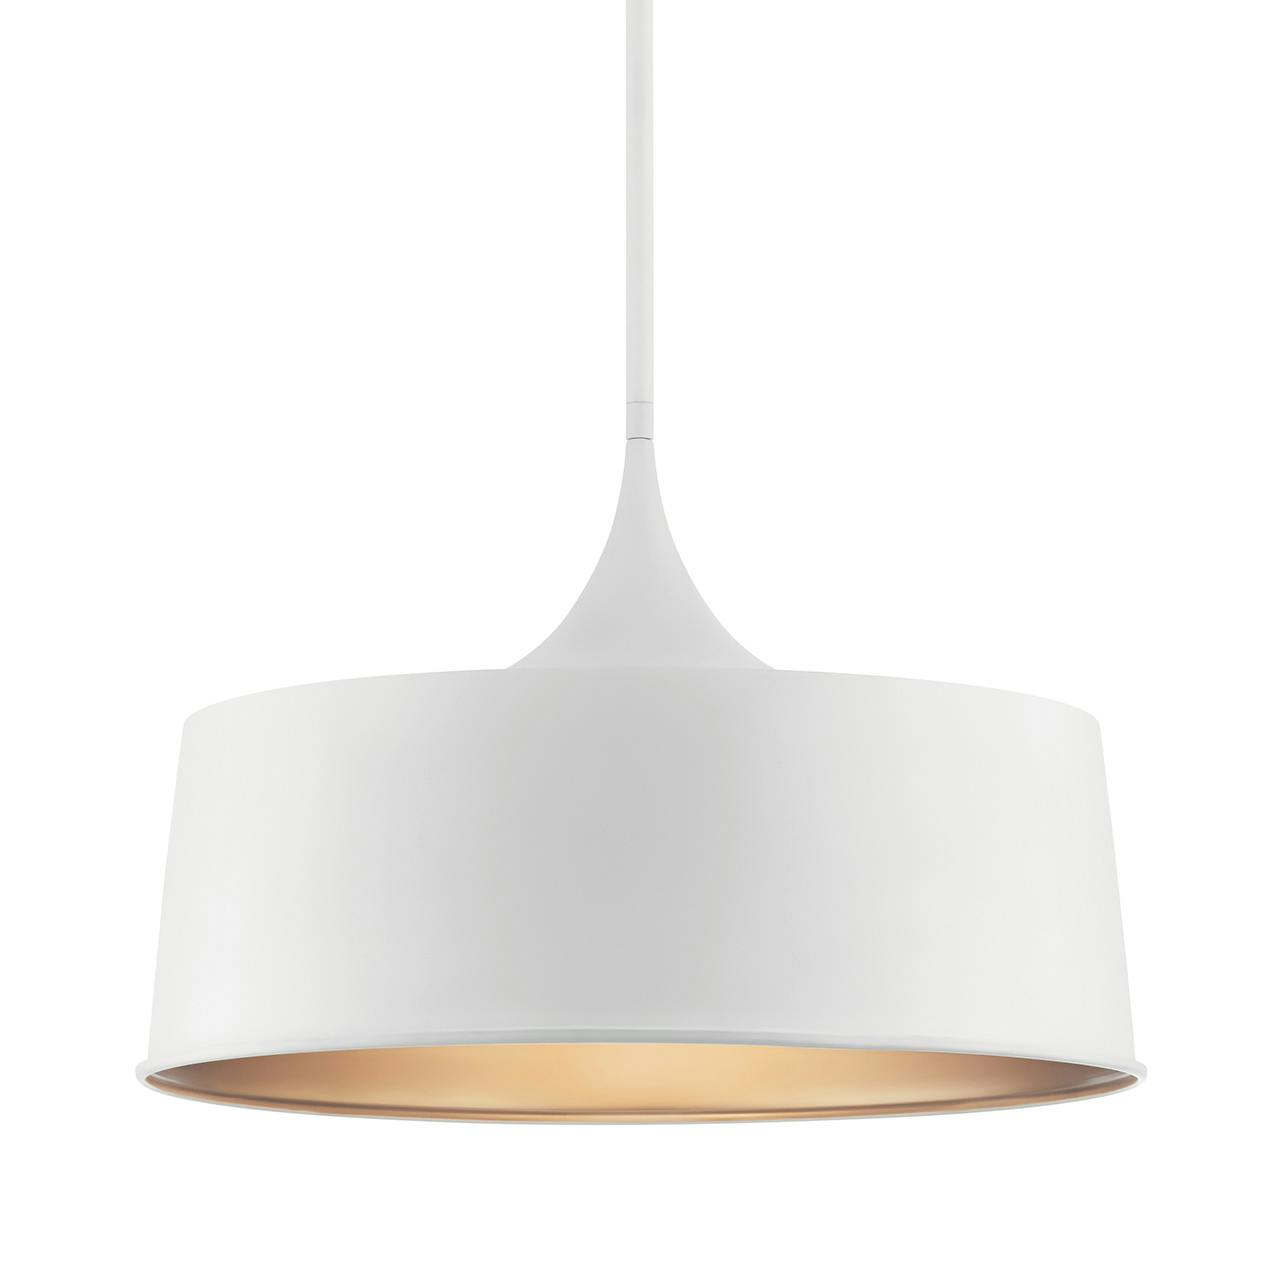 Elias 15.25" Convertible Pendant White without the canopy on a white background